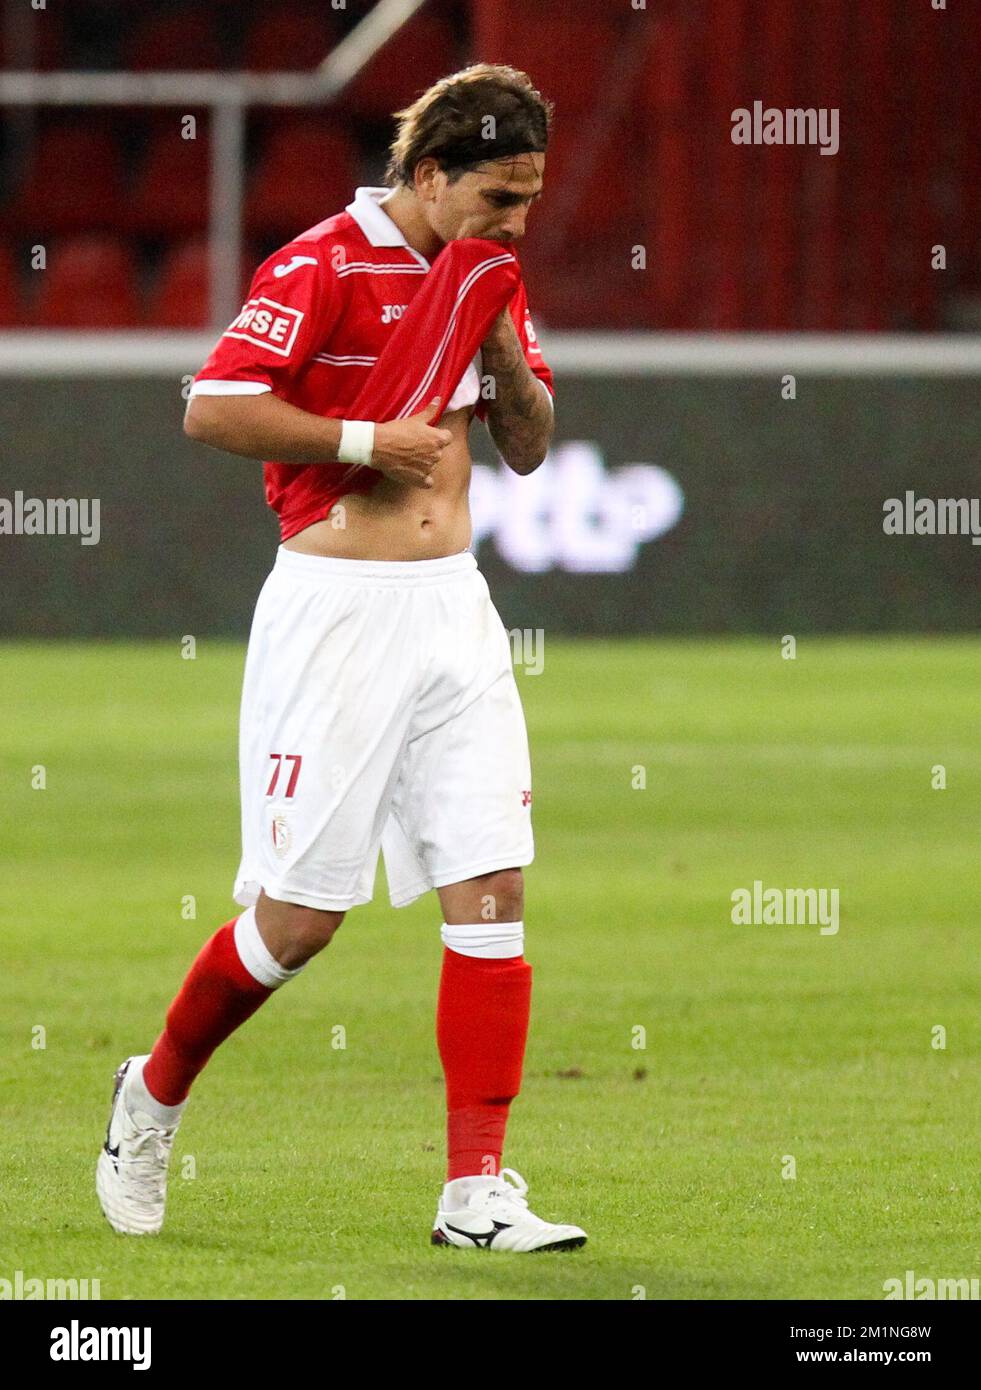 20120921 - LIEGE, BELGIUM: Standard's Maor Bar Buzaglo looks dejected during the Jupiler Pro League match between Standard de Liege and AA Gent, in Liege, Friday 21 September 2012, on the 8th day of the Belgian soccer championship. BELGA PHOTO VIRGINIE LEFOUR Stock Photo